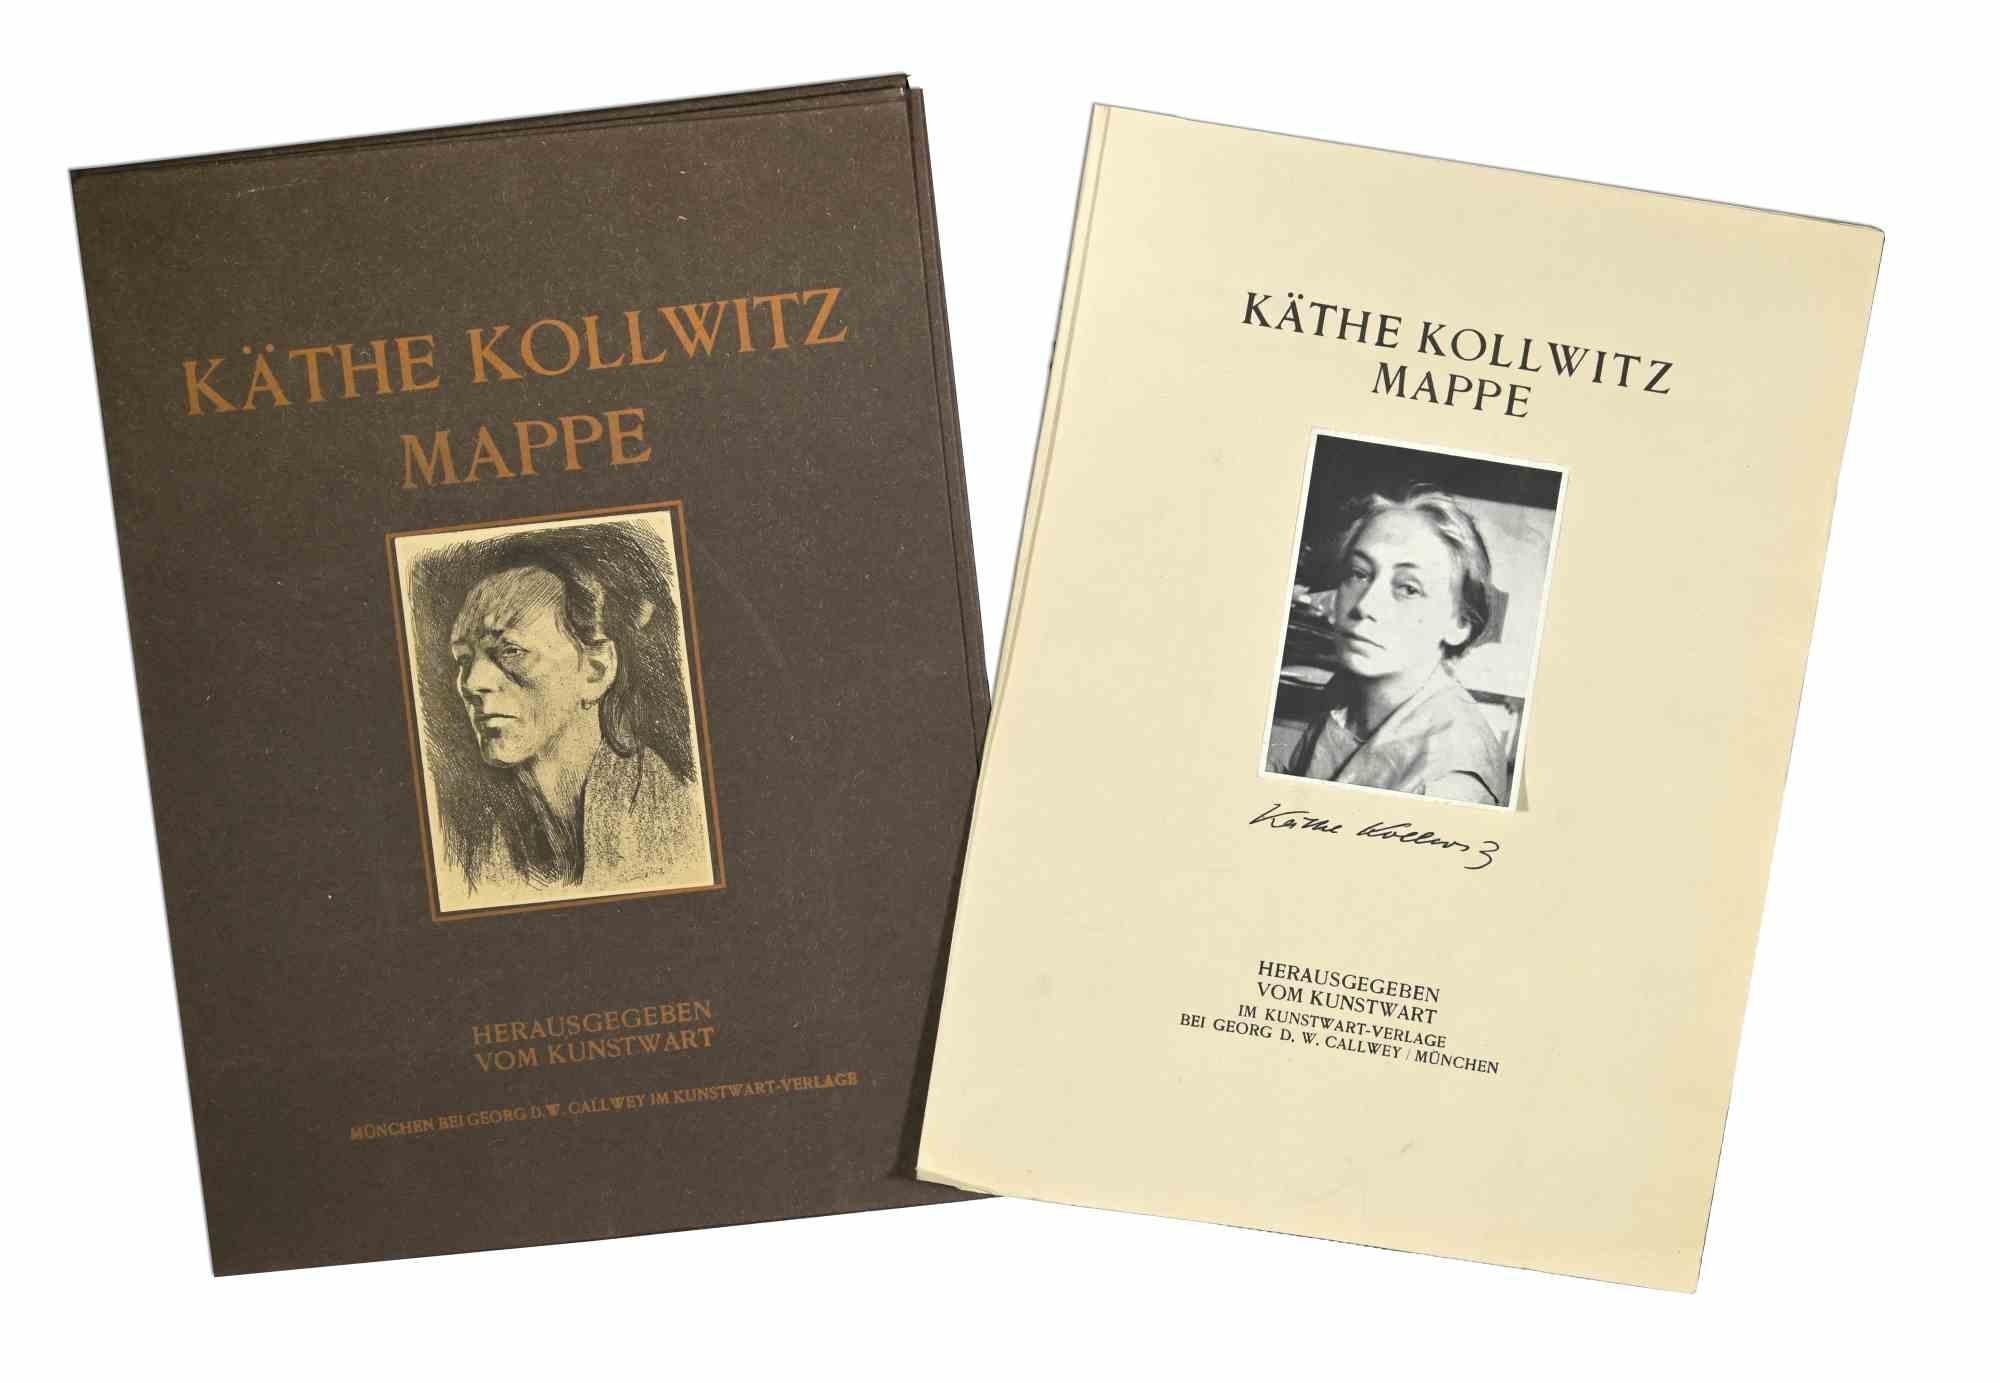 Maps is a work realized  by Kate Kollwitz, 1910 ca.

Portfolio, two-page cover sheet with text and 13 insert sheets with mounted heliogravures based on drawings by Käthe Kollwitz, ed. Kunstwart-Verlag at Georg D. Callwey, Munich.

Sheet size 42 x 31